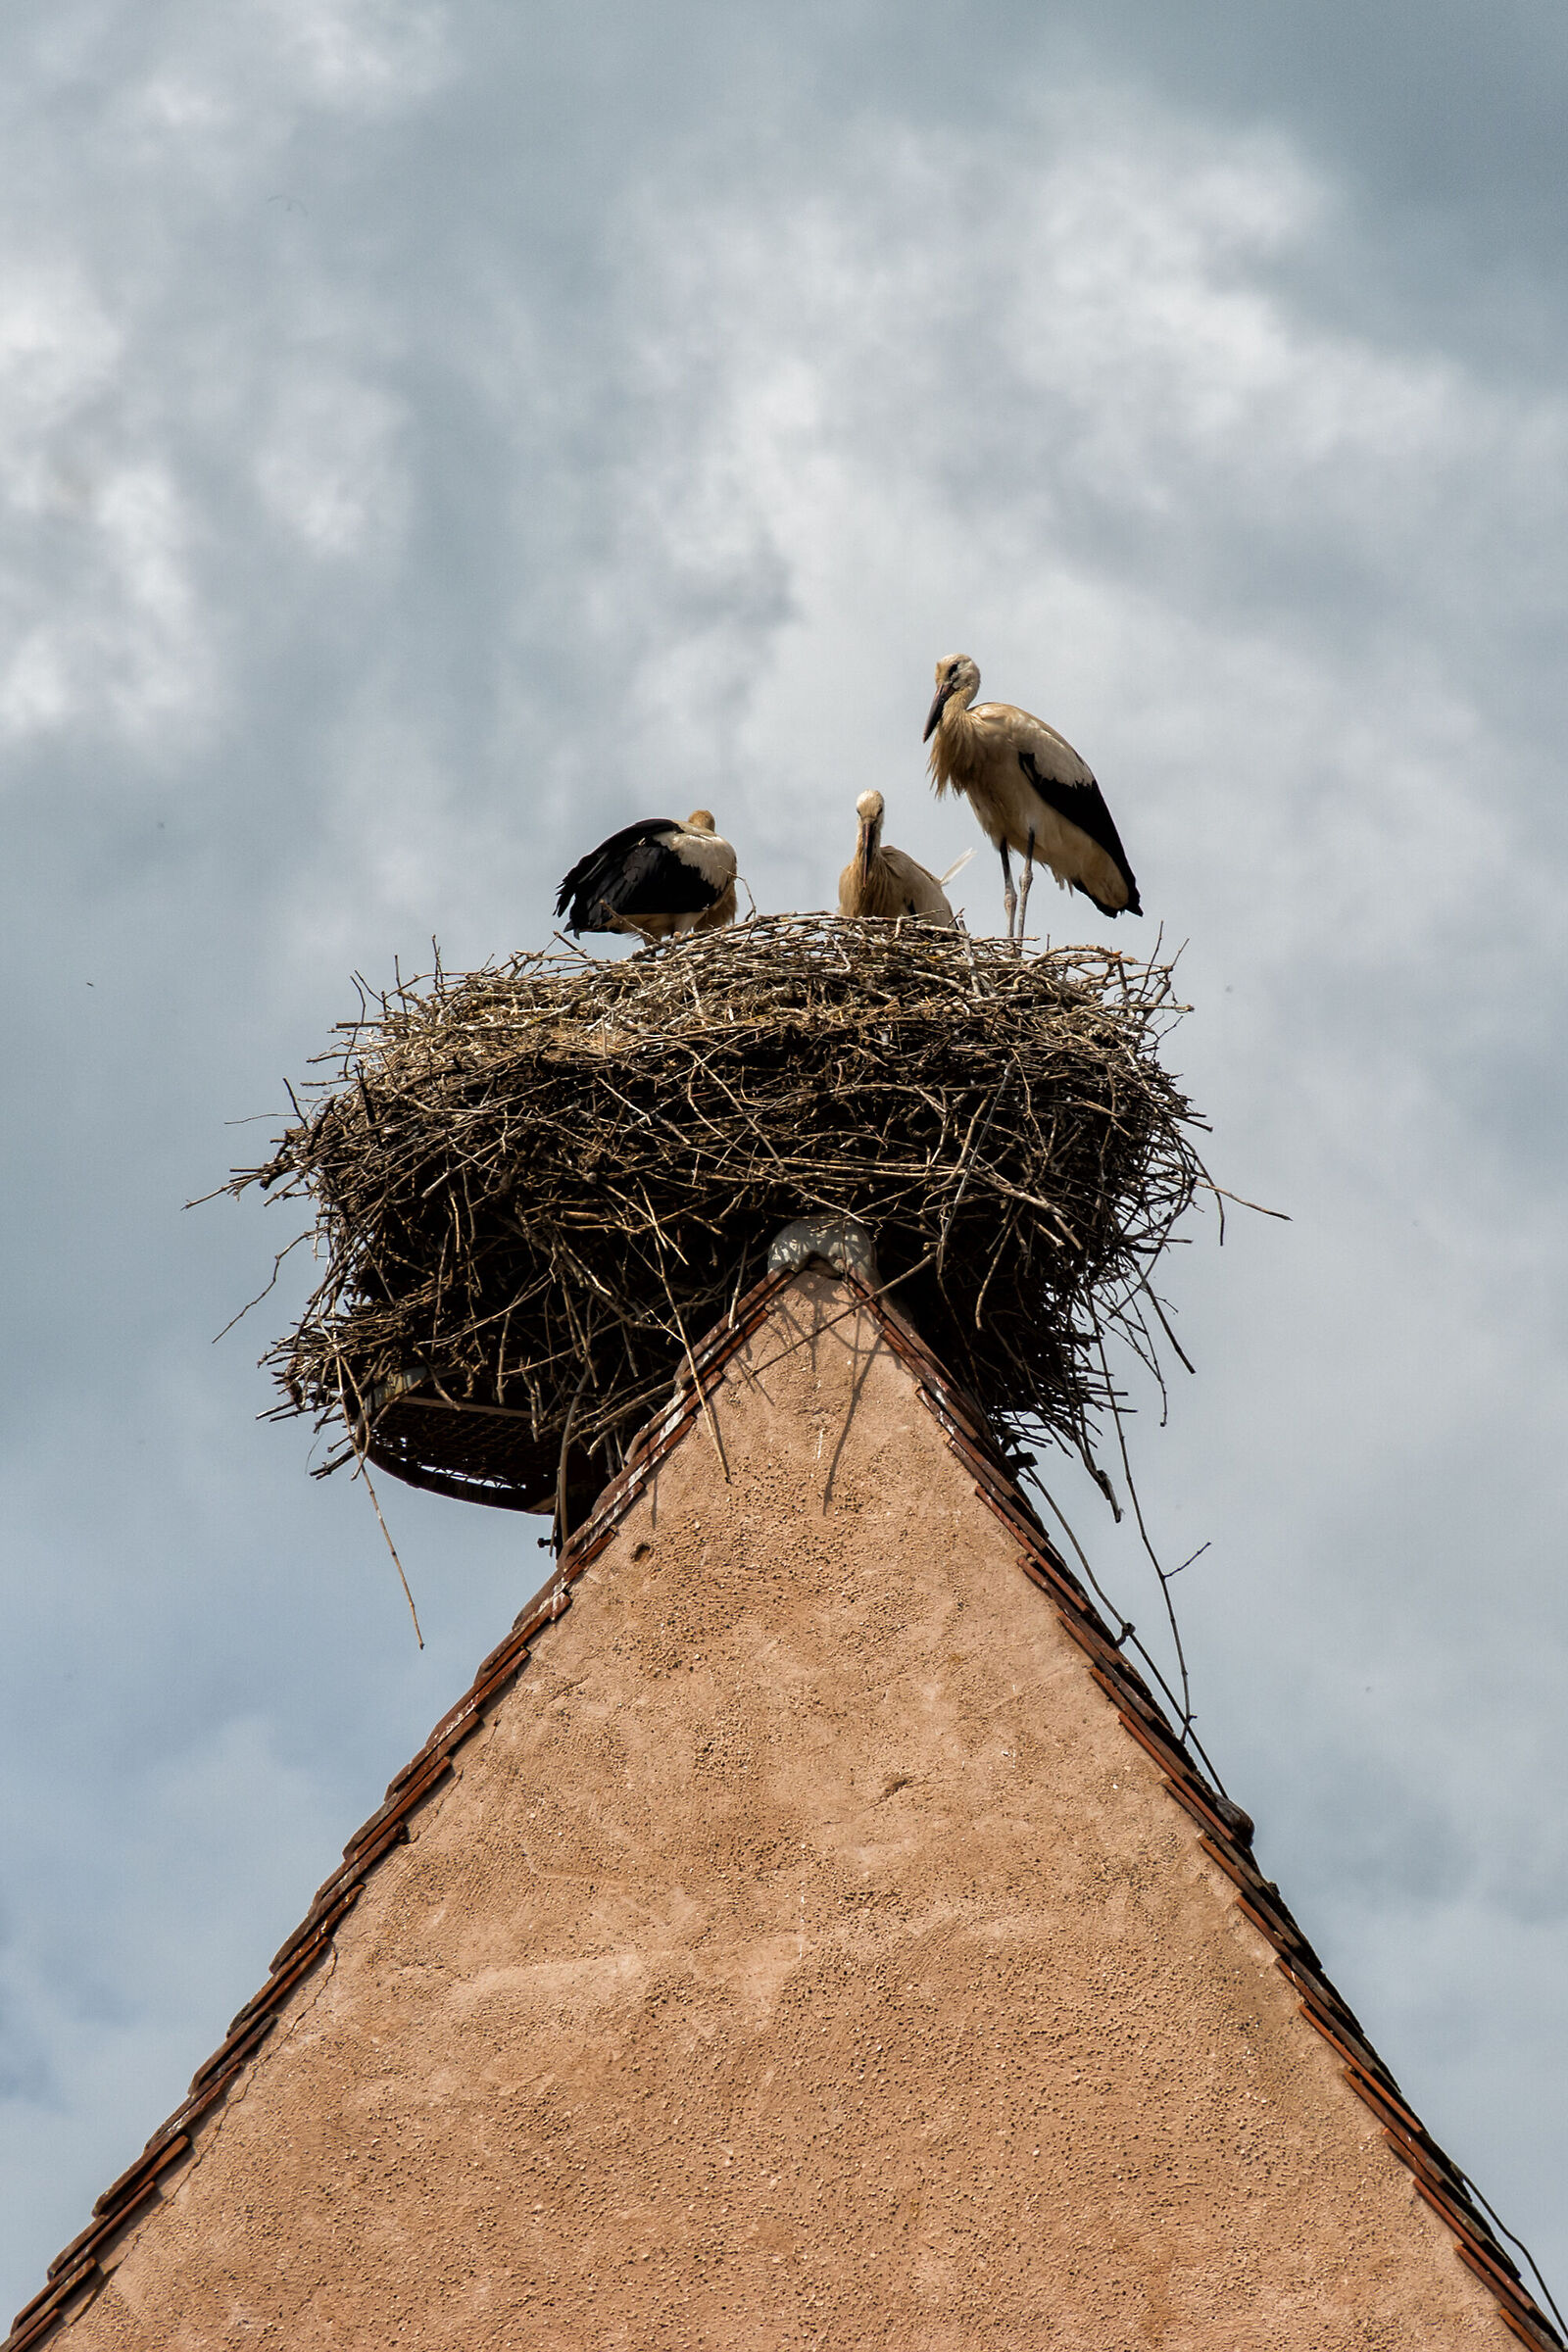 The country of storks...